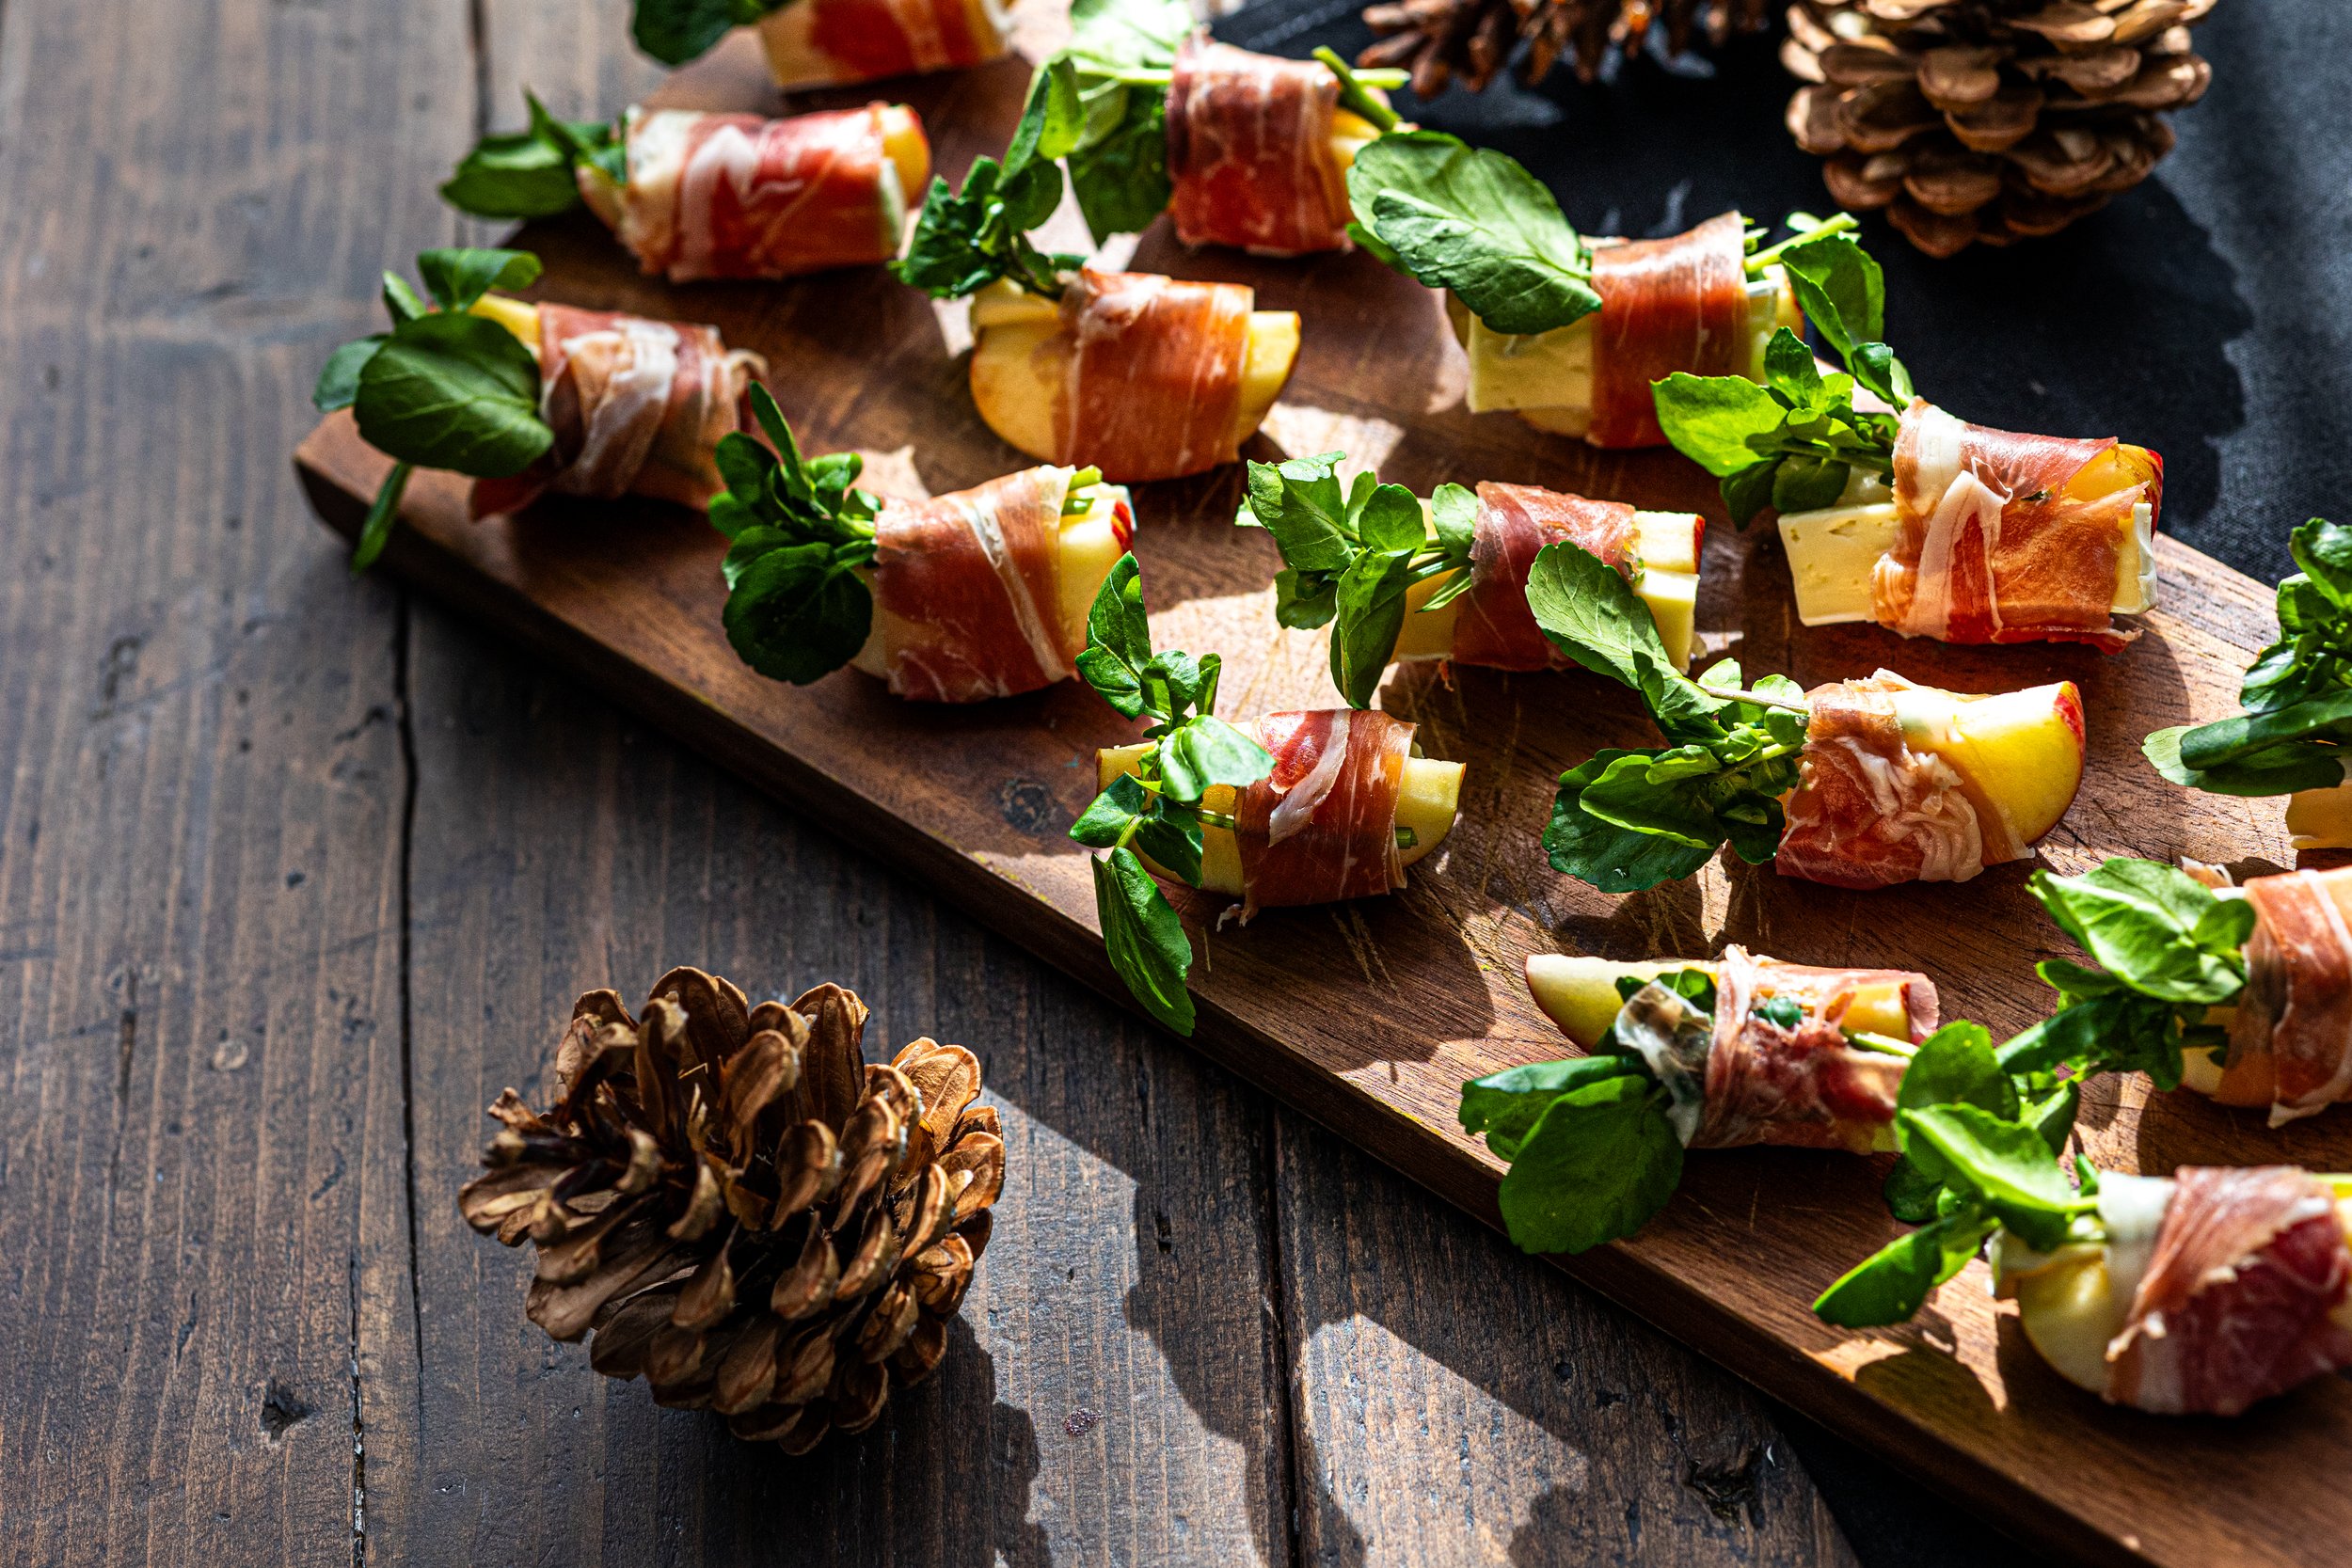 watercress-parma-ham-apple-slices-canape-party-christmas-1573.jpg